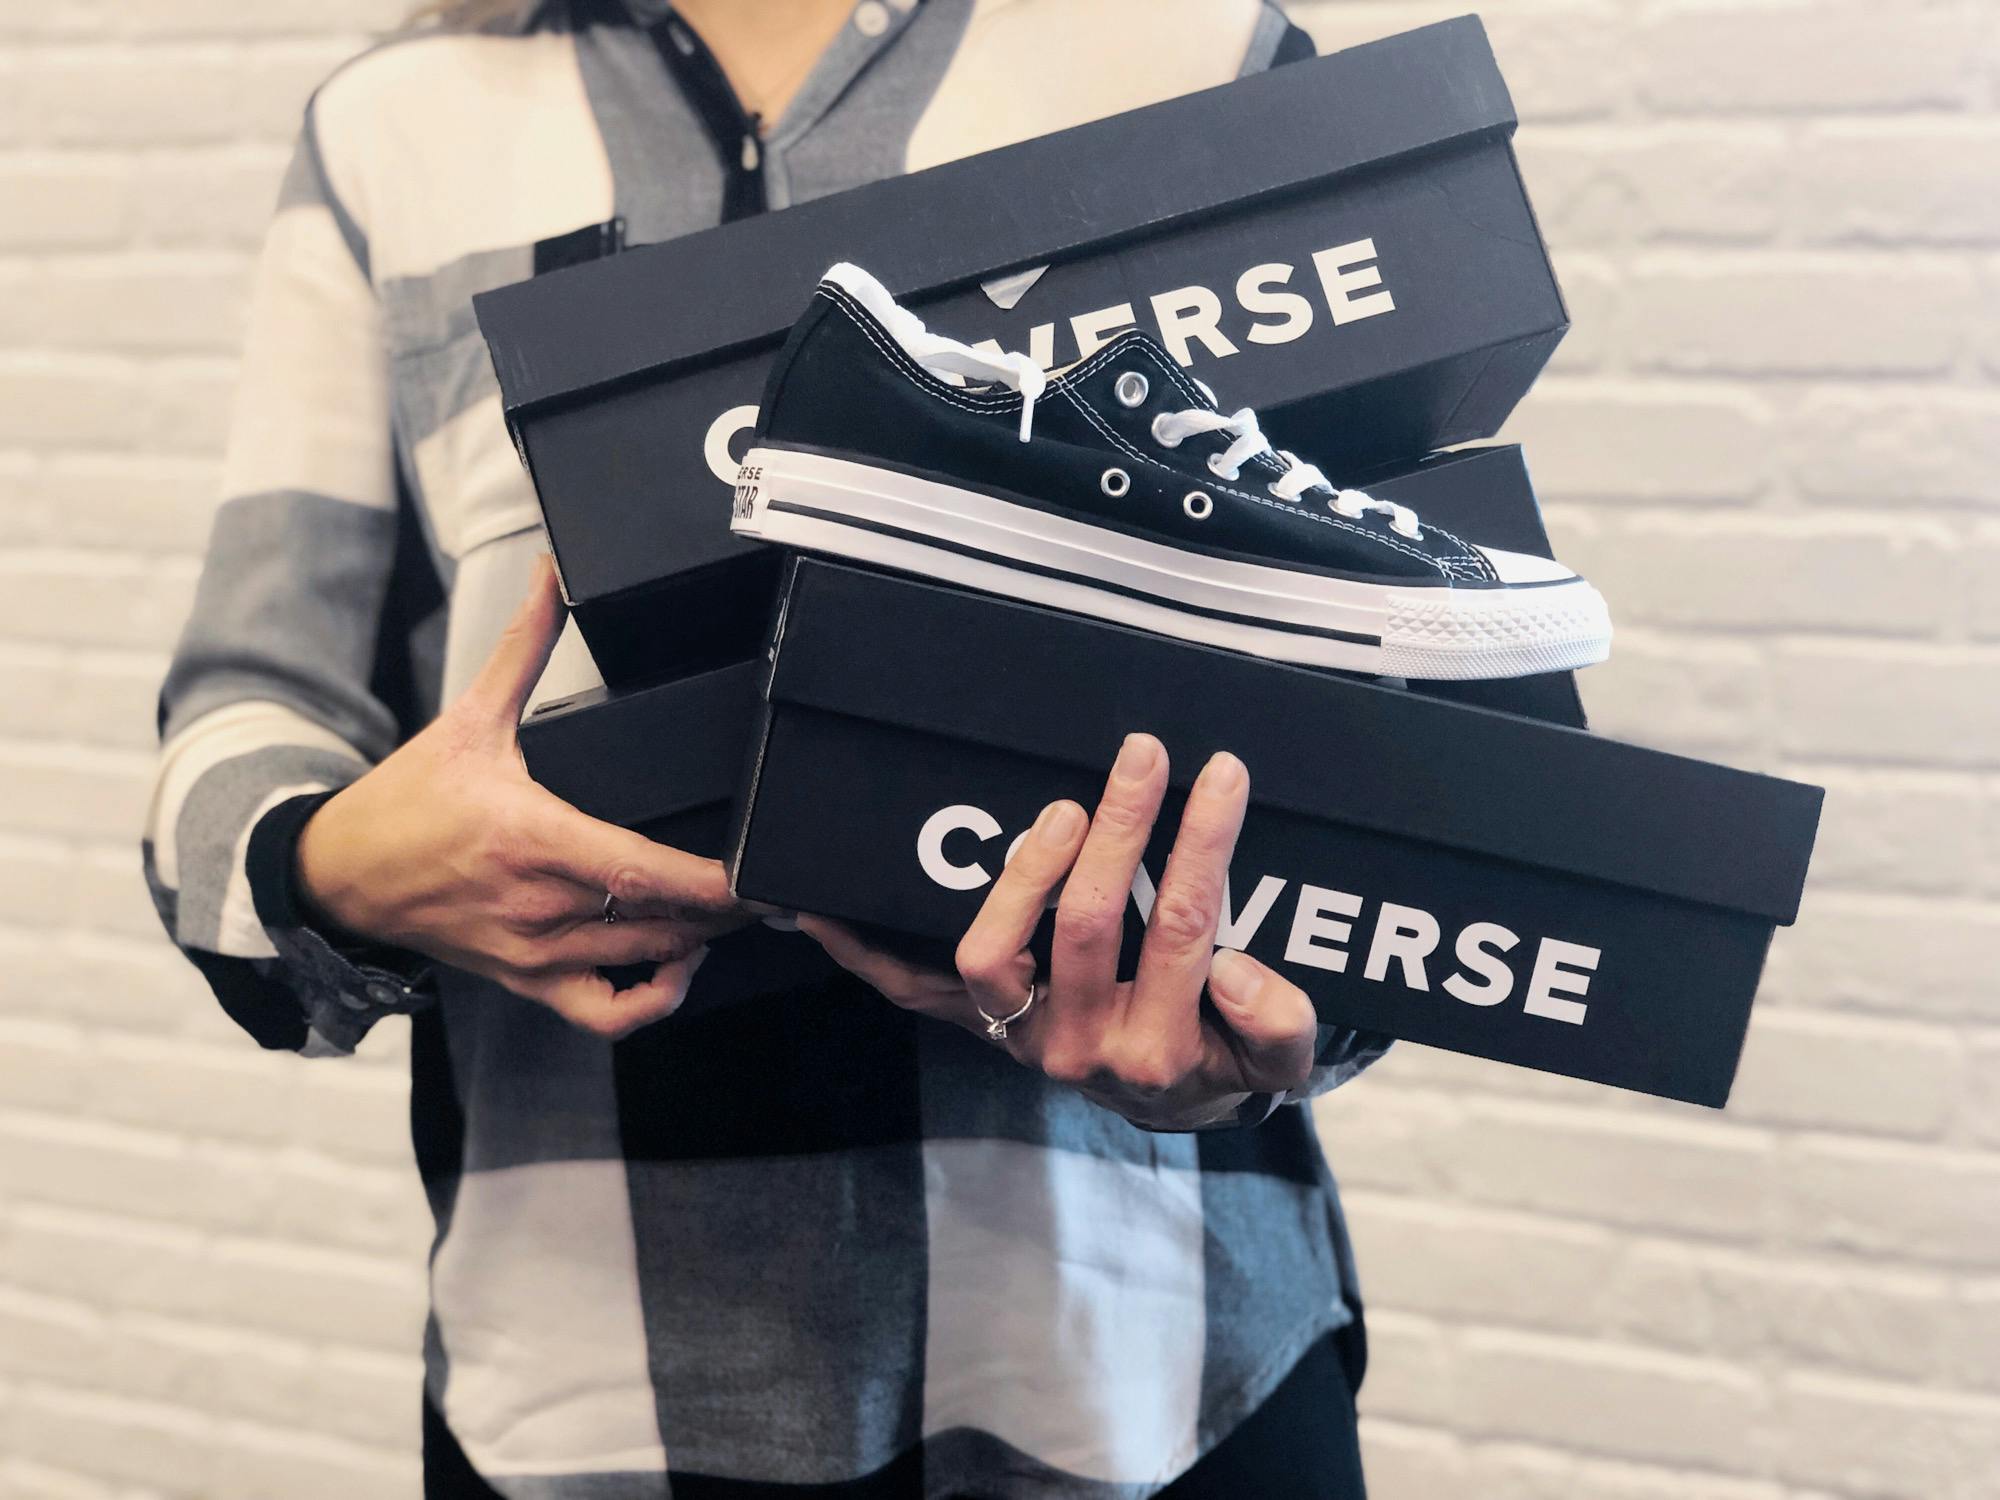 15 Converse Sales Tips Tricks To Get All The Deals - The Krazy Coupon Lady